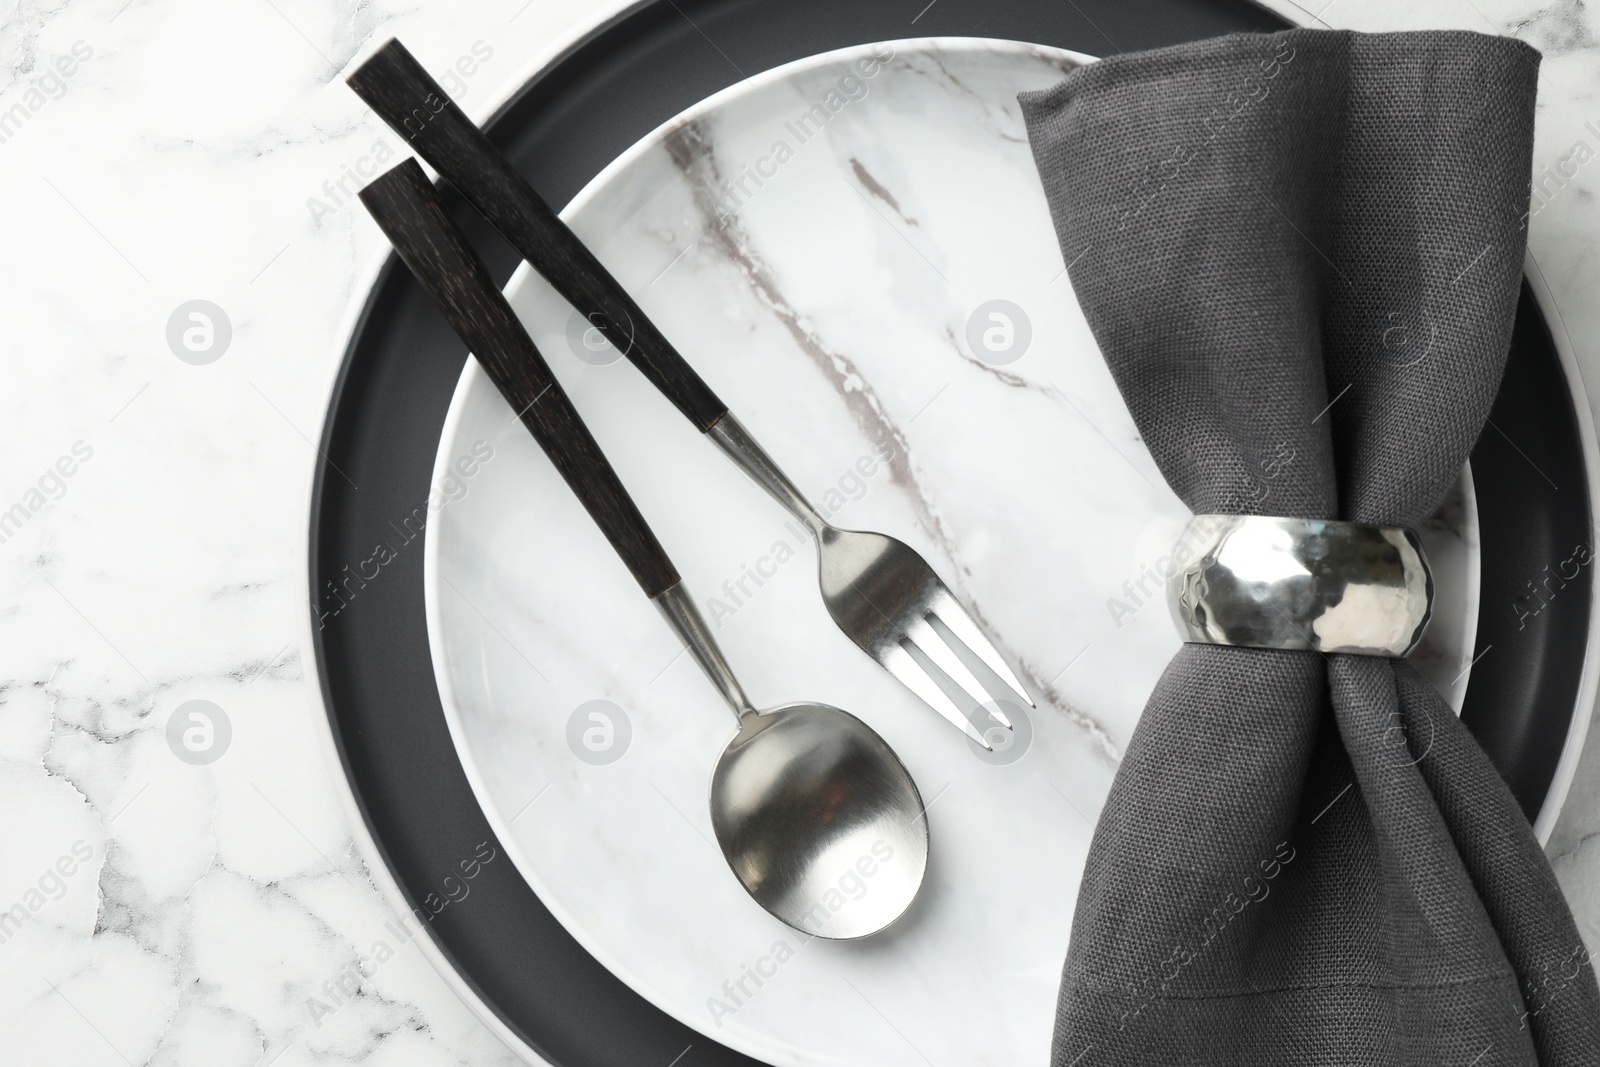 Photo of Stylish setting with cutlery, napkin and plates on white marble table, top view